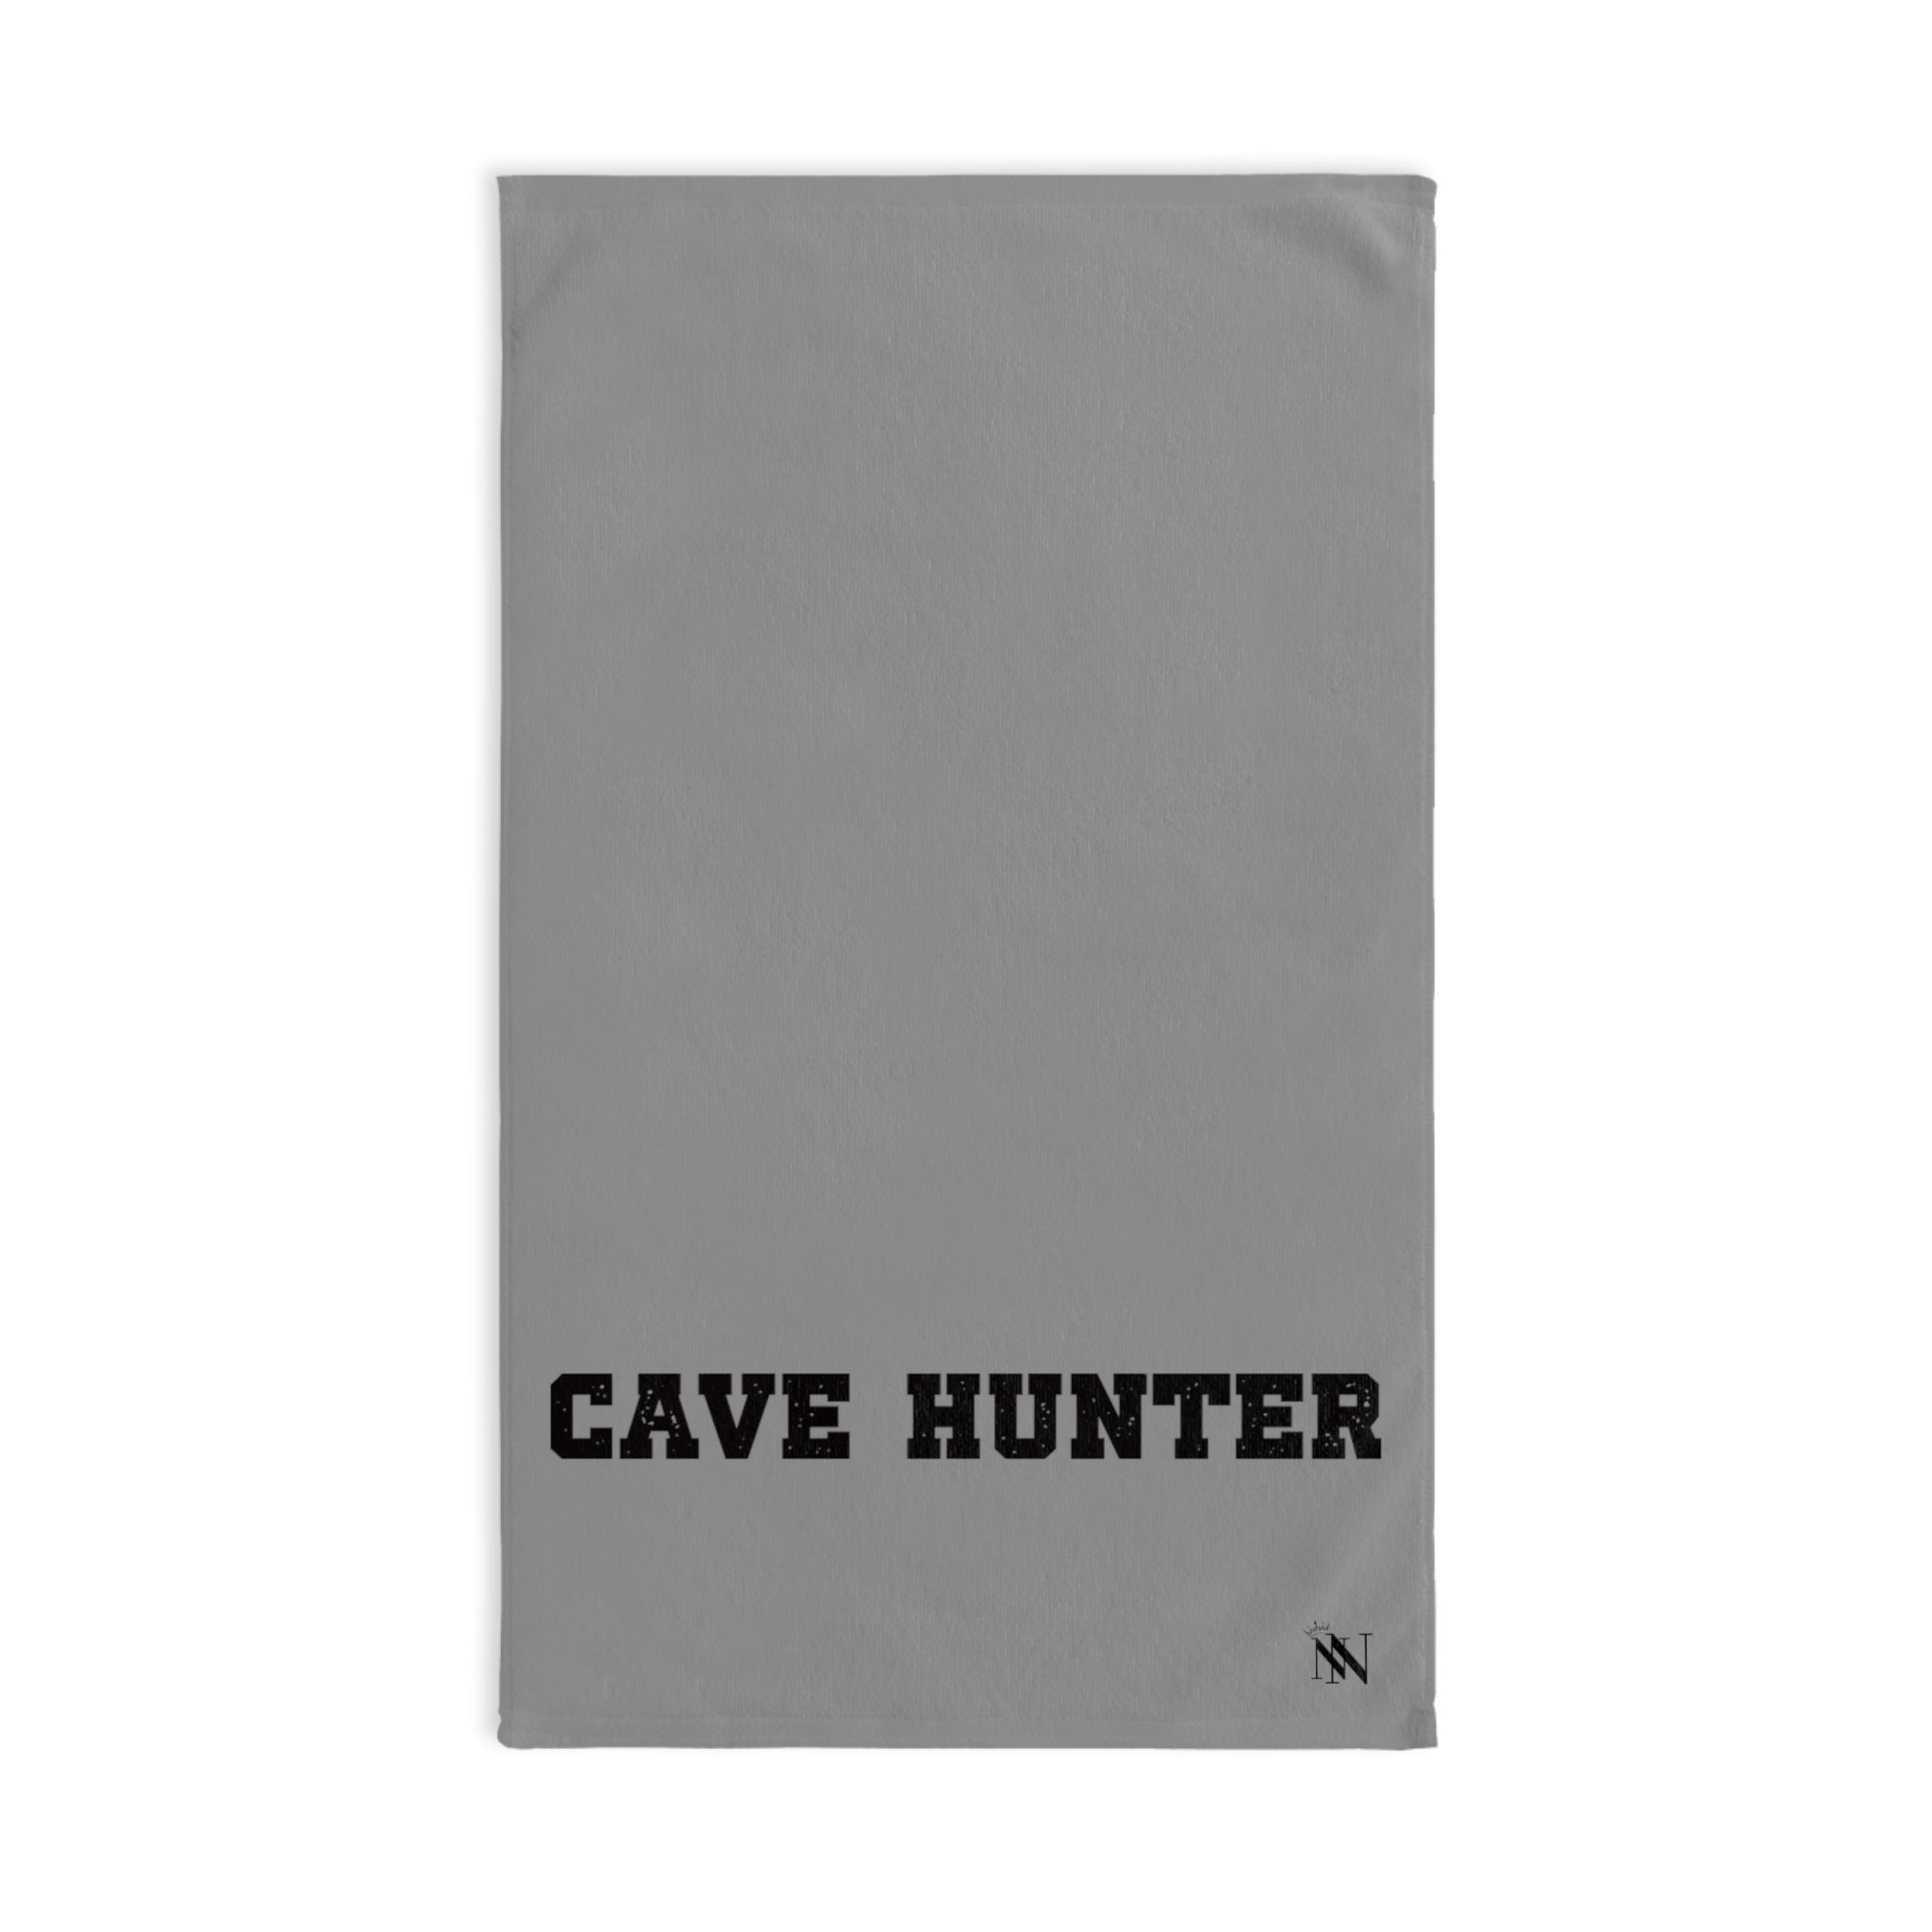 Cave Hunter Grey | Anniversary Wedding, Christmas, Valentines Day, Birthday Gifts for Him, Her, Romantic Gifts for Wife, Girlfriend, Couples Gifts for Boyfriend, Husband NECTAR NAPKINS